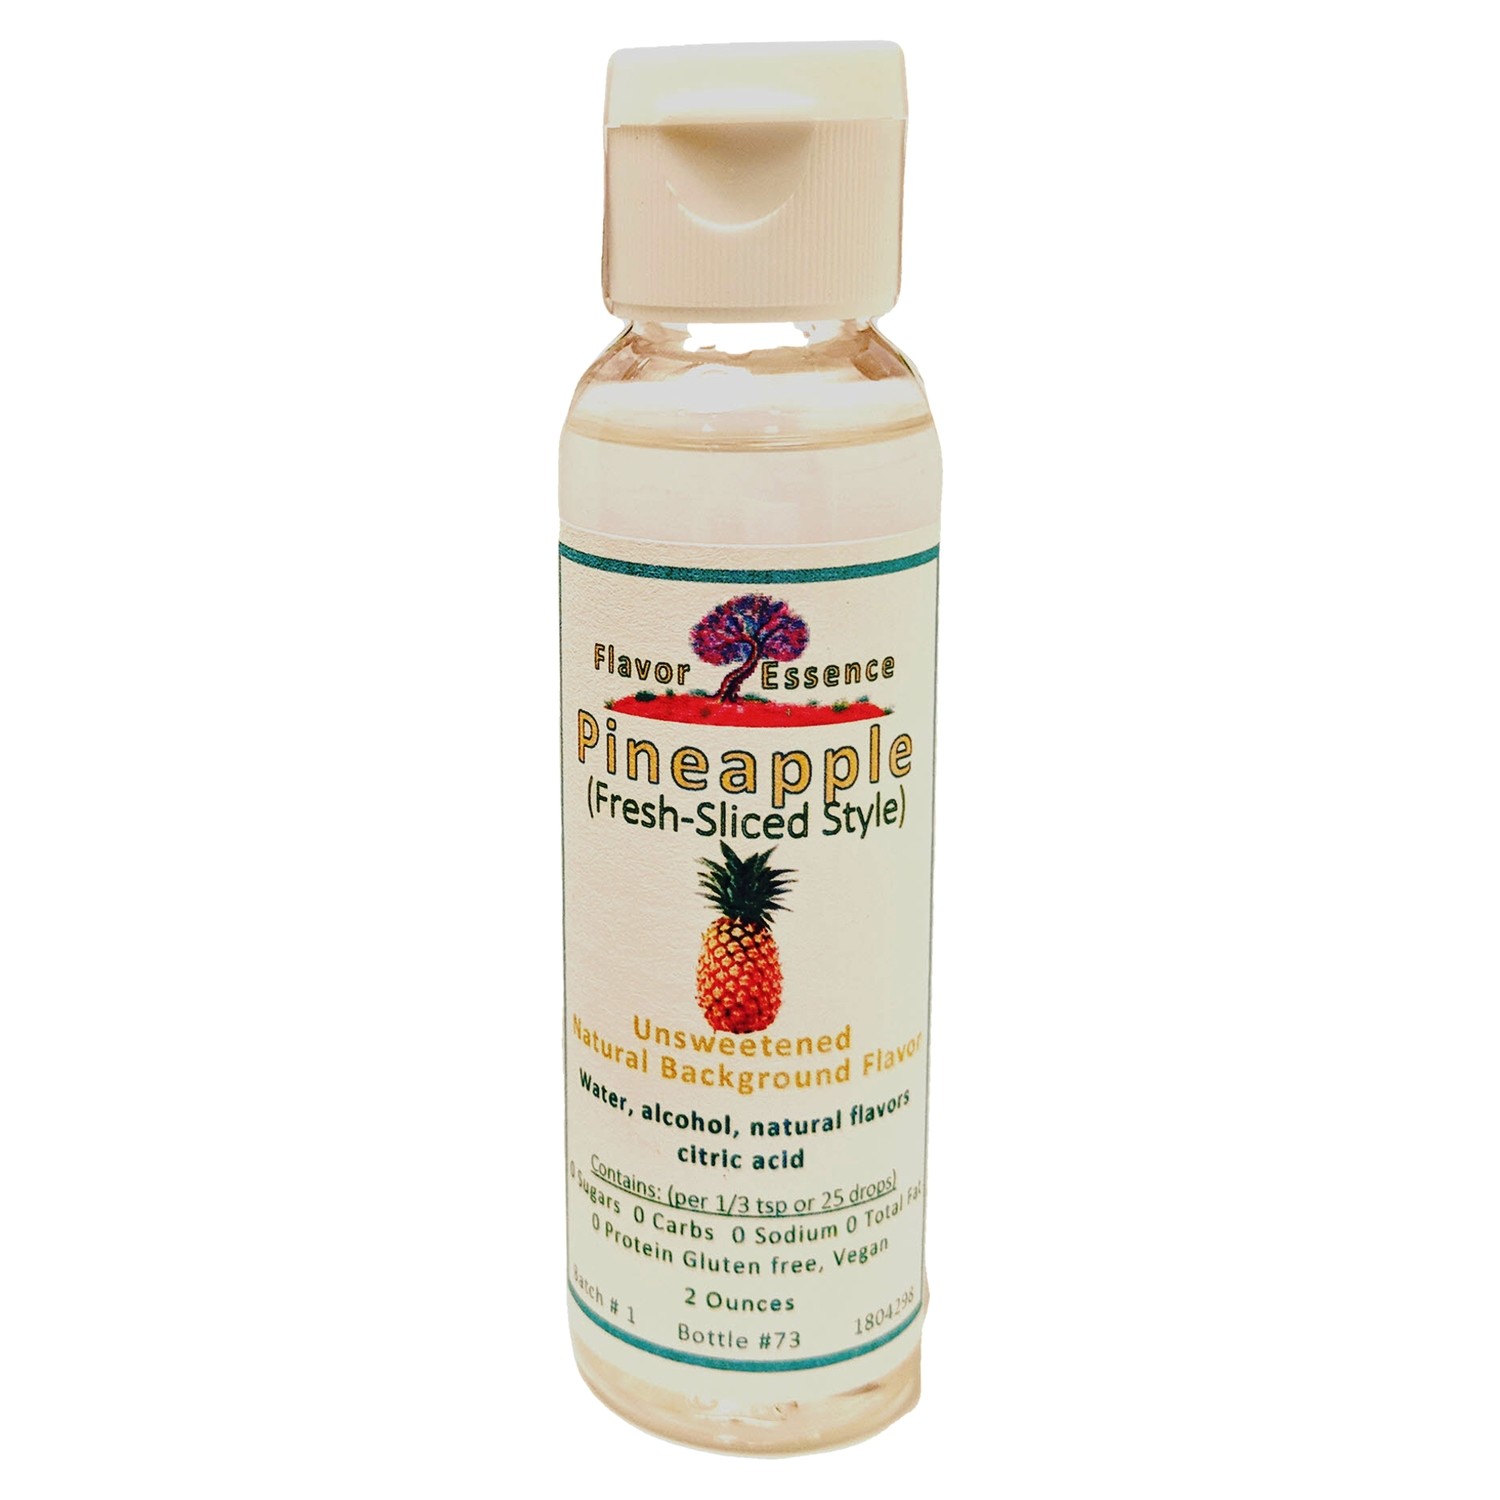 Flavor Essence Pineapple 2oz - Natural Unsweetened Background Flavoring